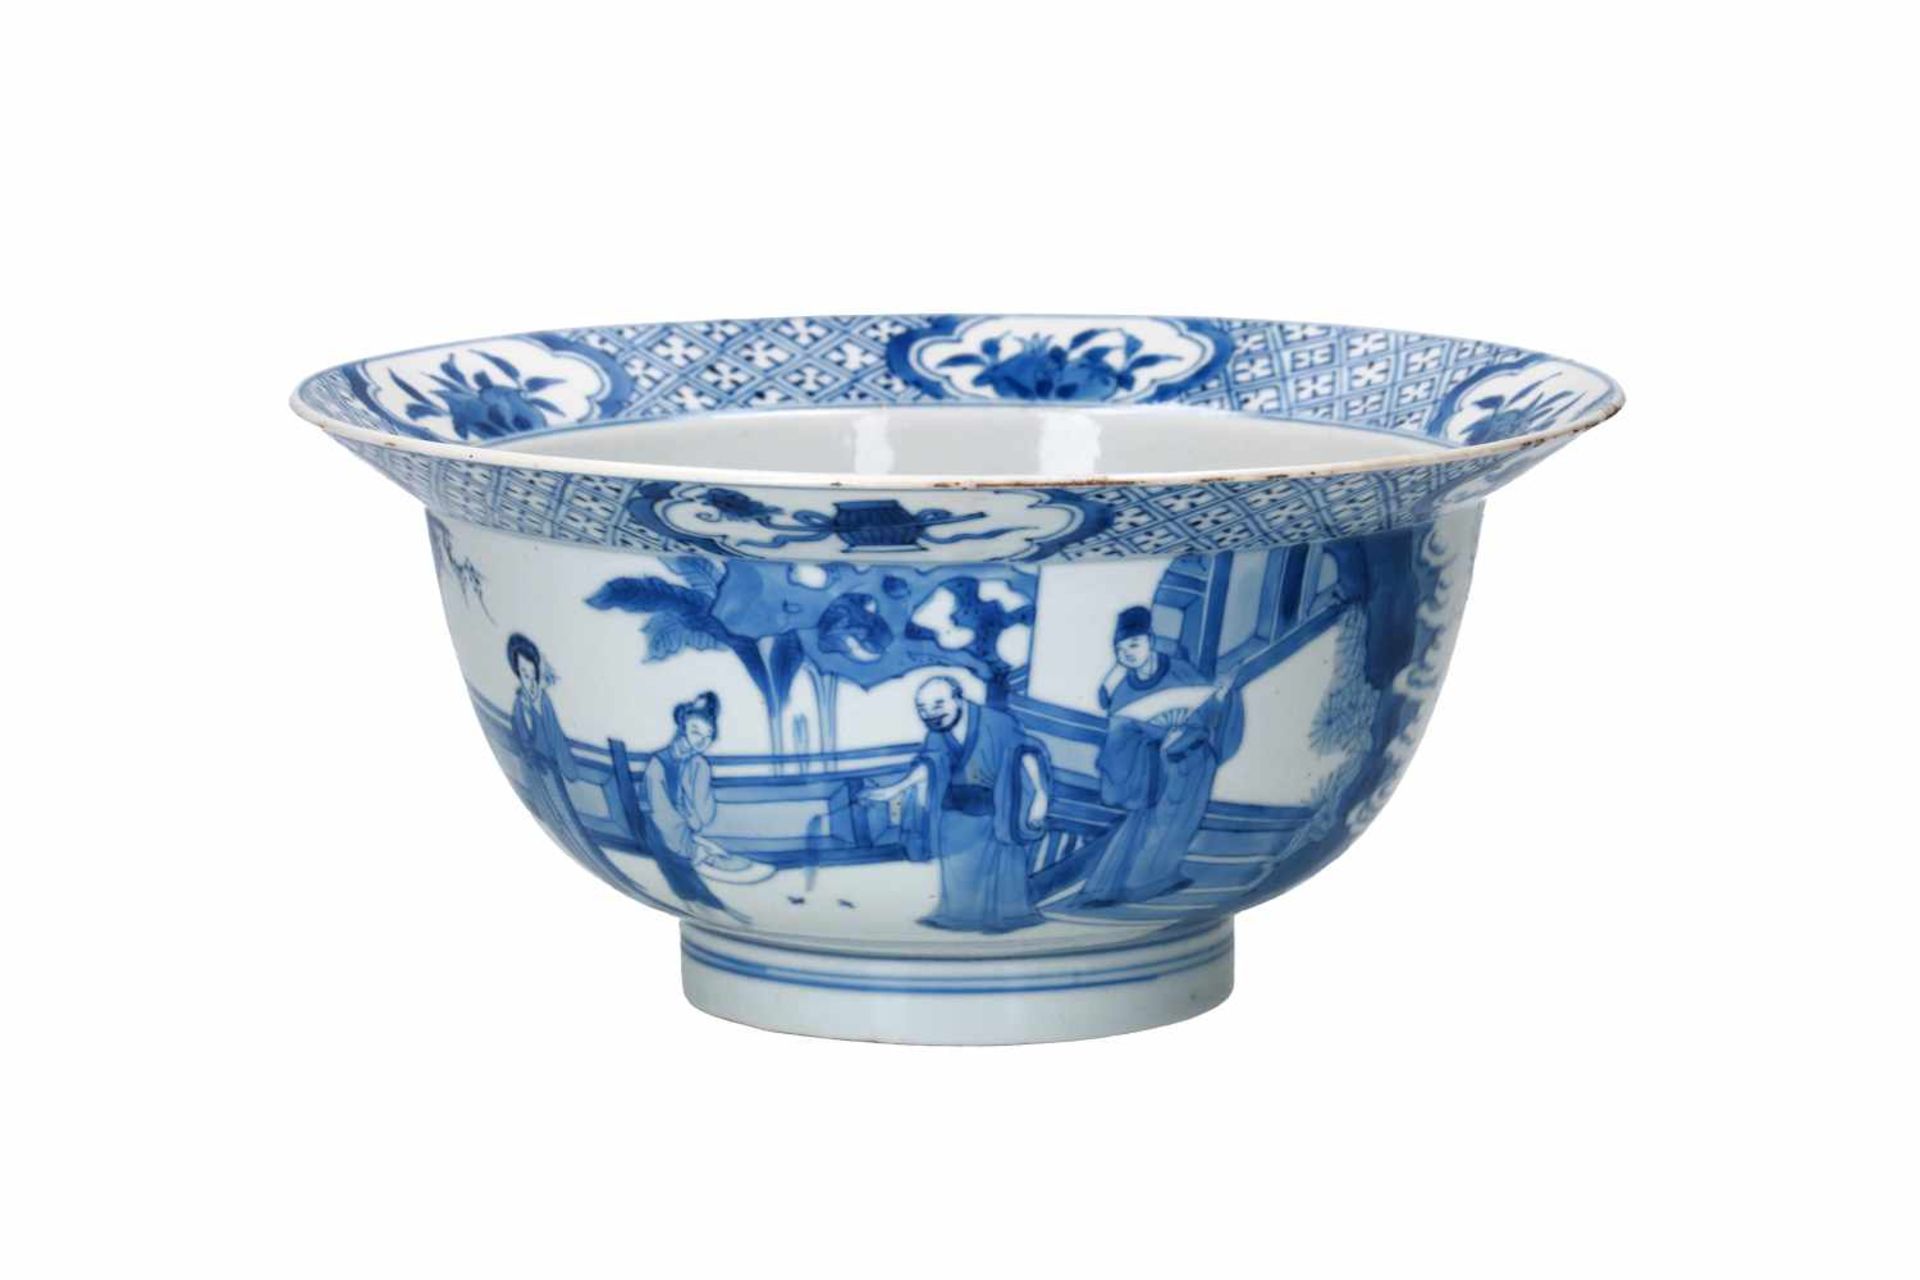 A blue and white porcelain 'klapmuts' bowl, decorated with scenes of the Romance of the Western